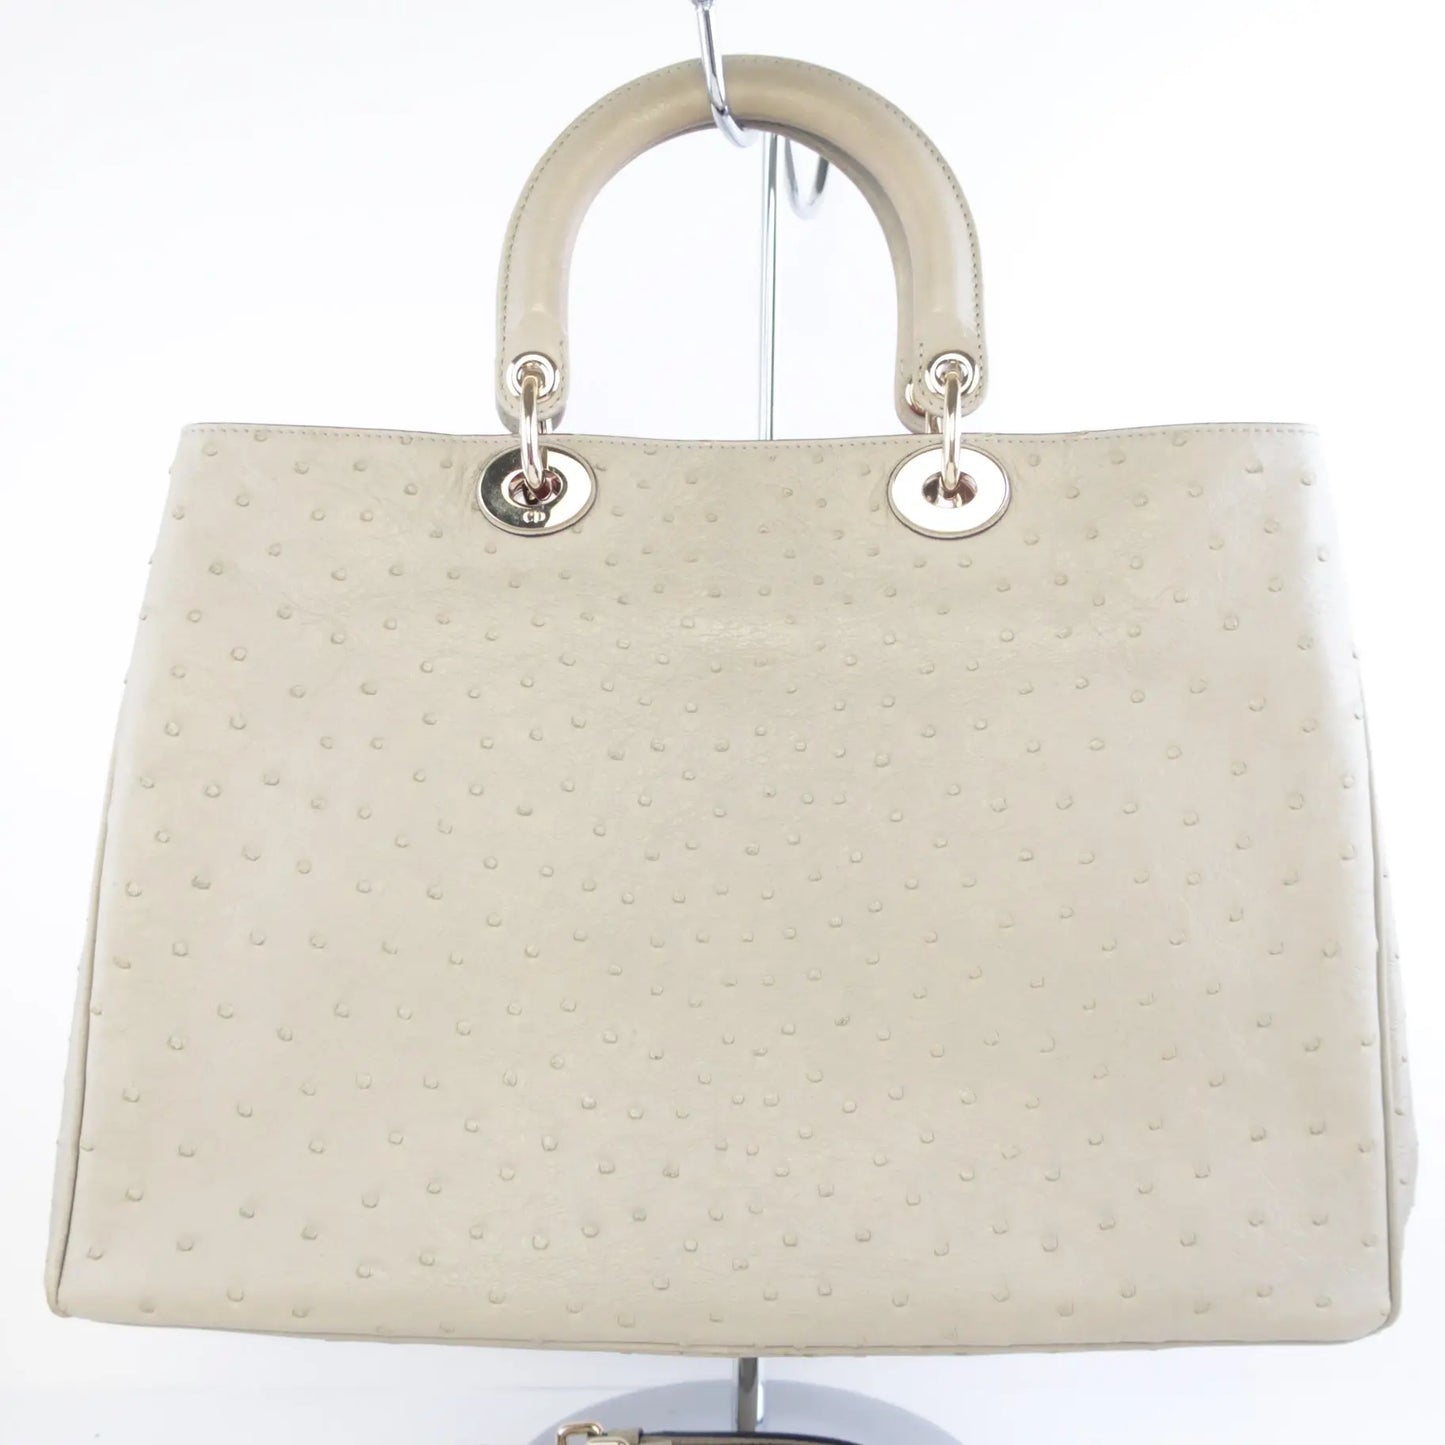 Load image into Gallery viewer, Dior Dior Large Beige Ostrich Diorissimo Tote Bag LVBagaholic
